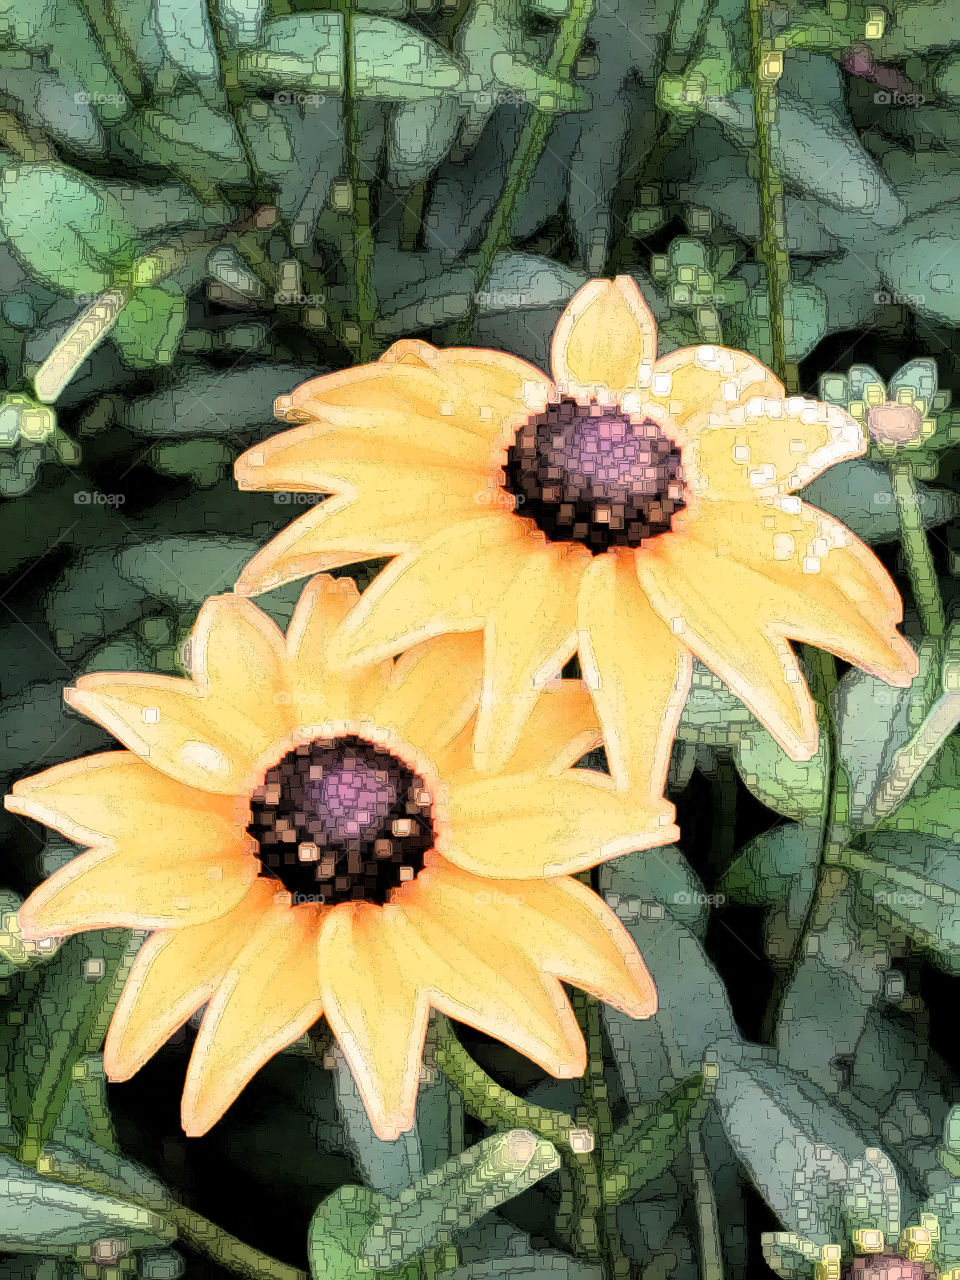 An artistic rendering of black-eyed Susans in the sun using a filter to enhance the orange color.